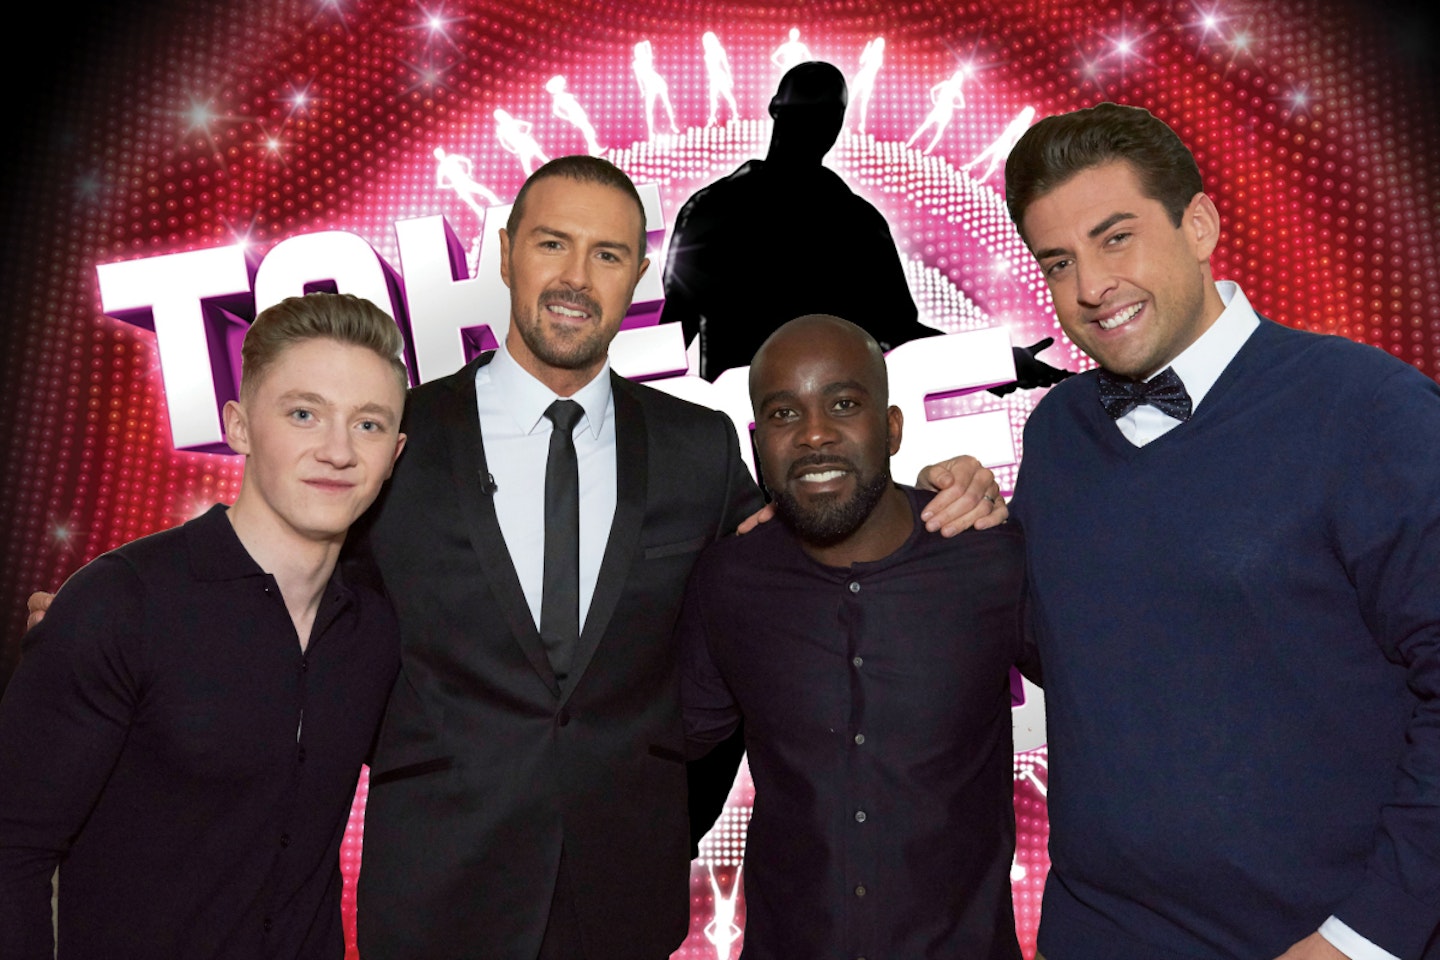 take-me-out-celebrity-special-paddy-mcguinness-james-argent-nile-wilson-melvin-odoom